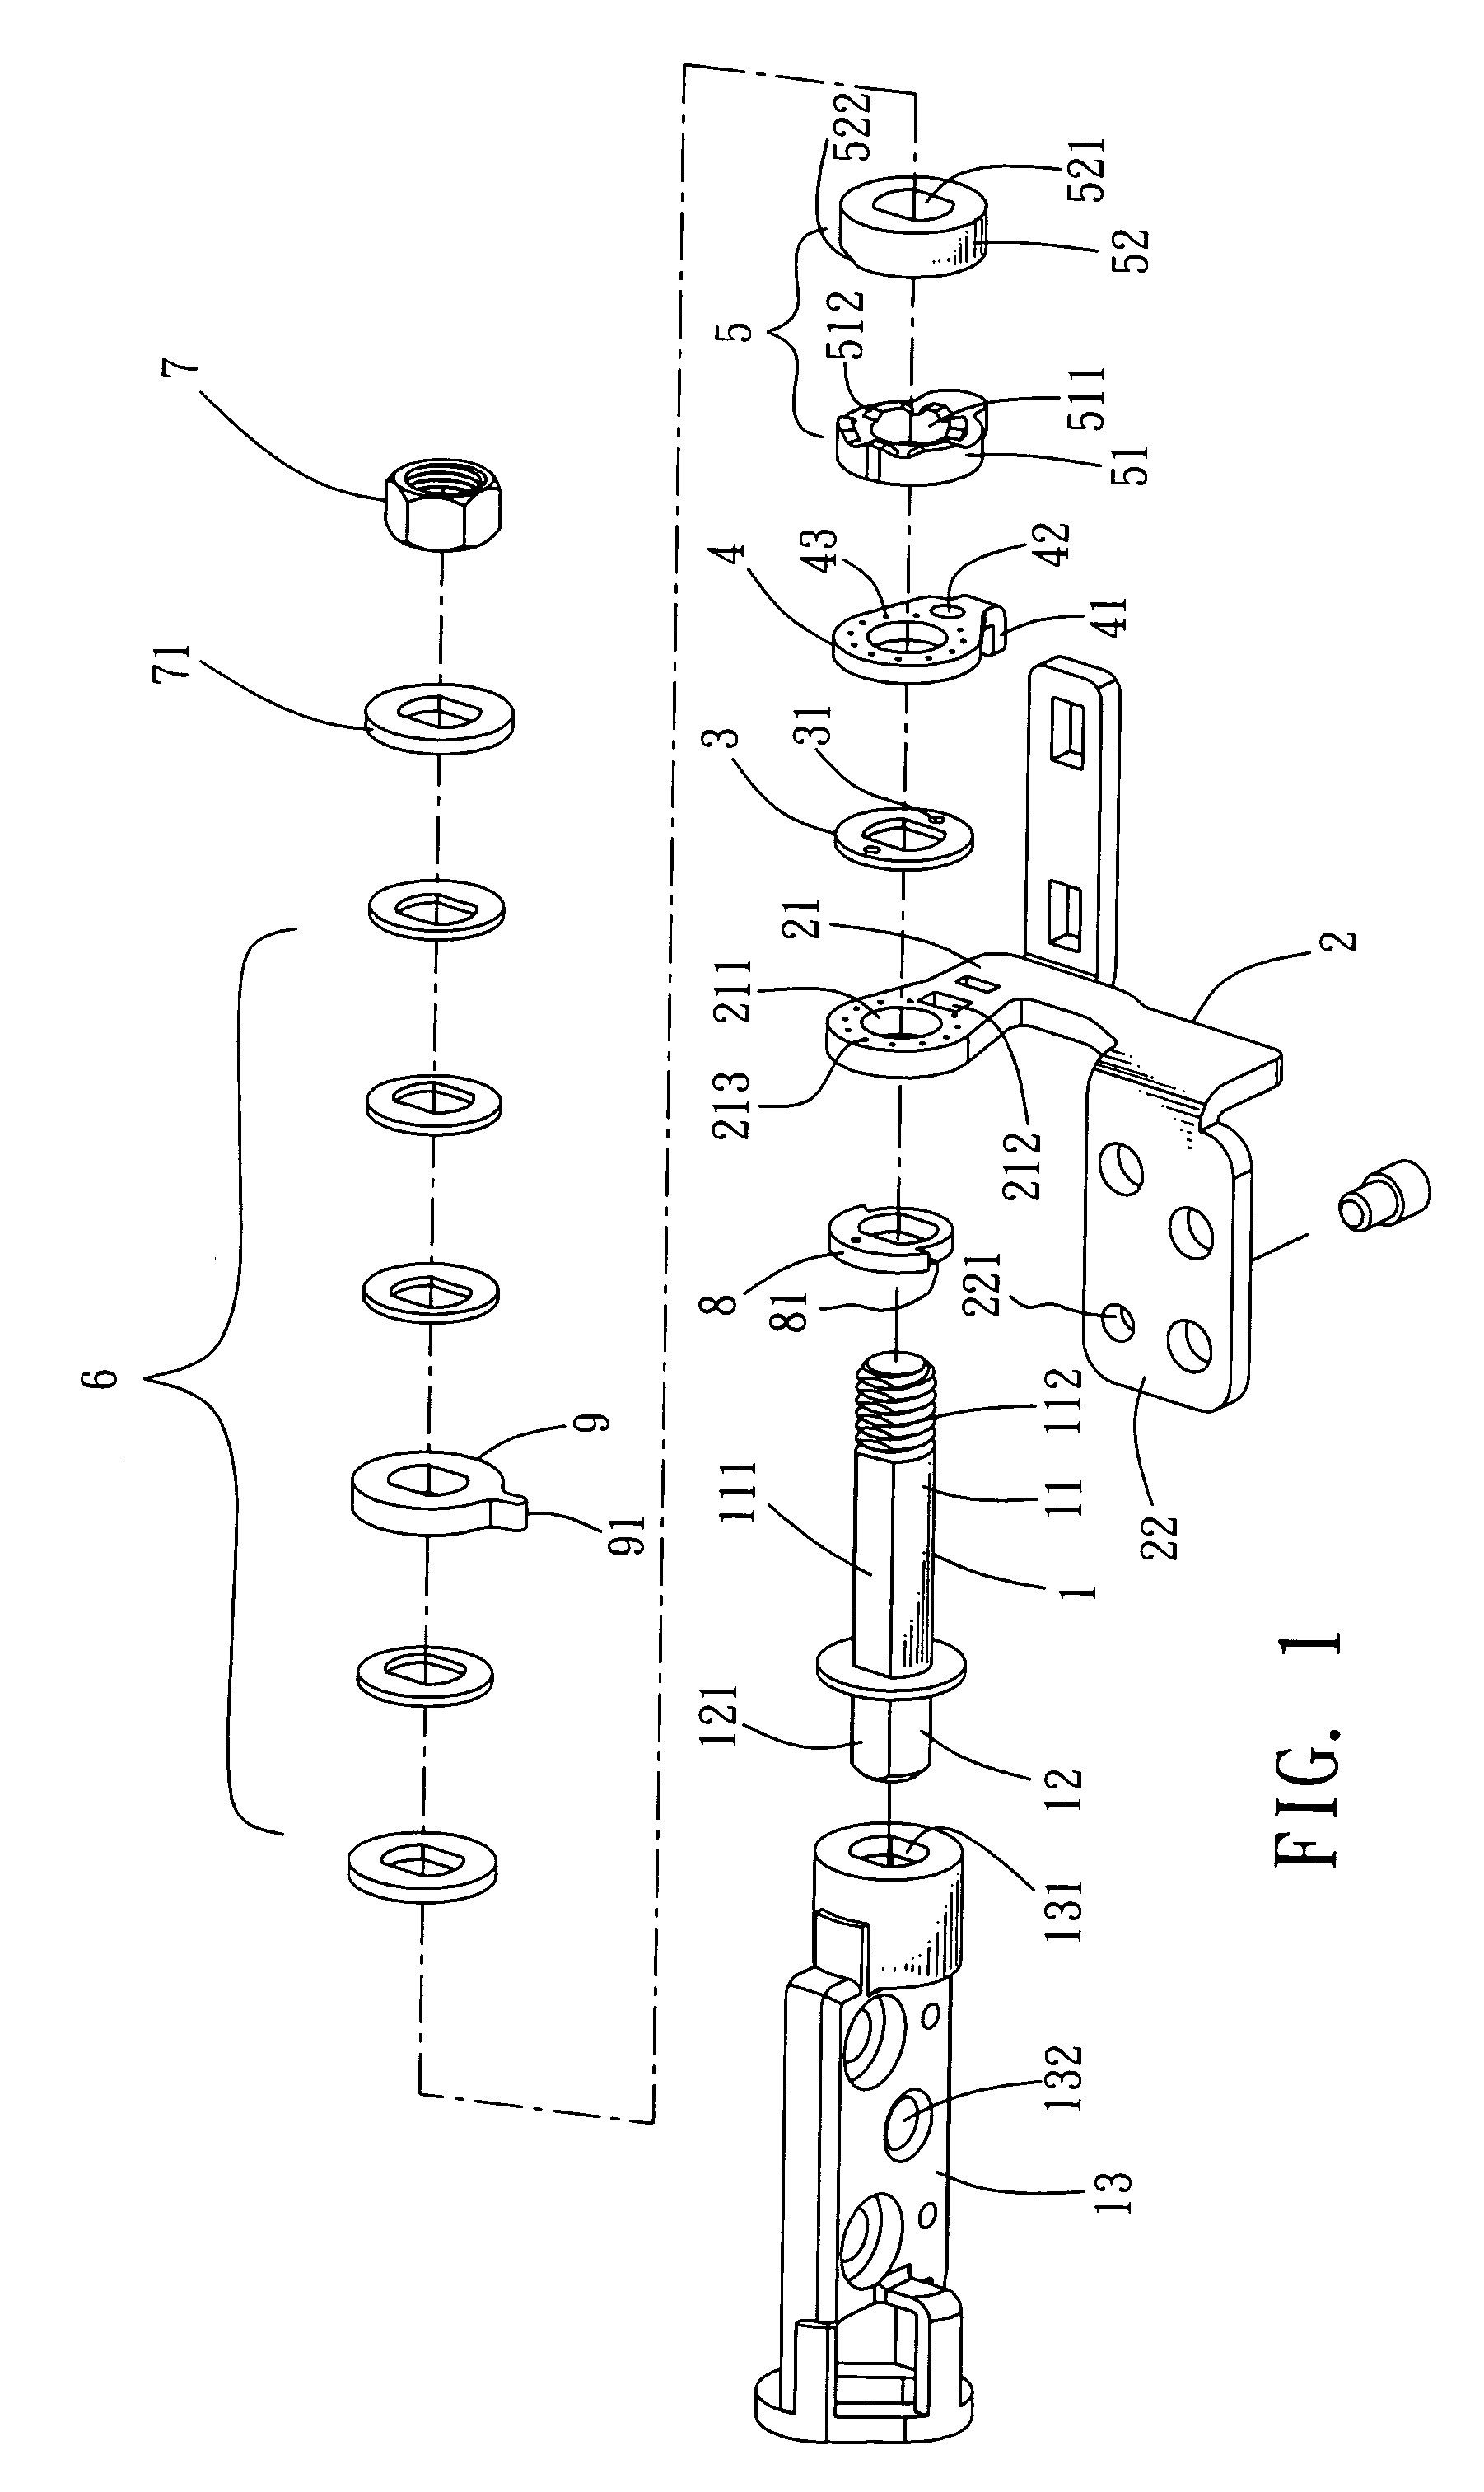 Rotating shaft structure with automatic locking mechanism